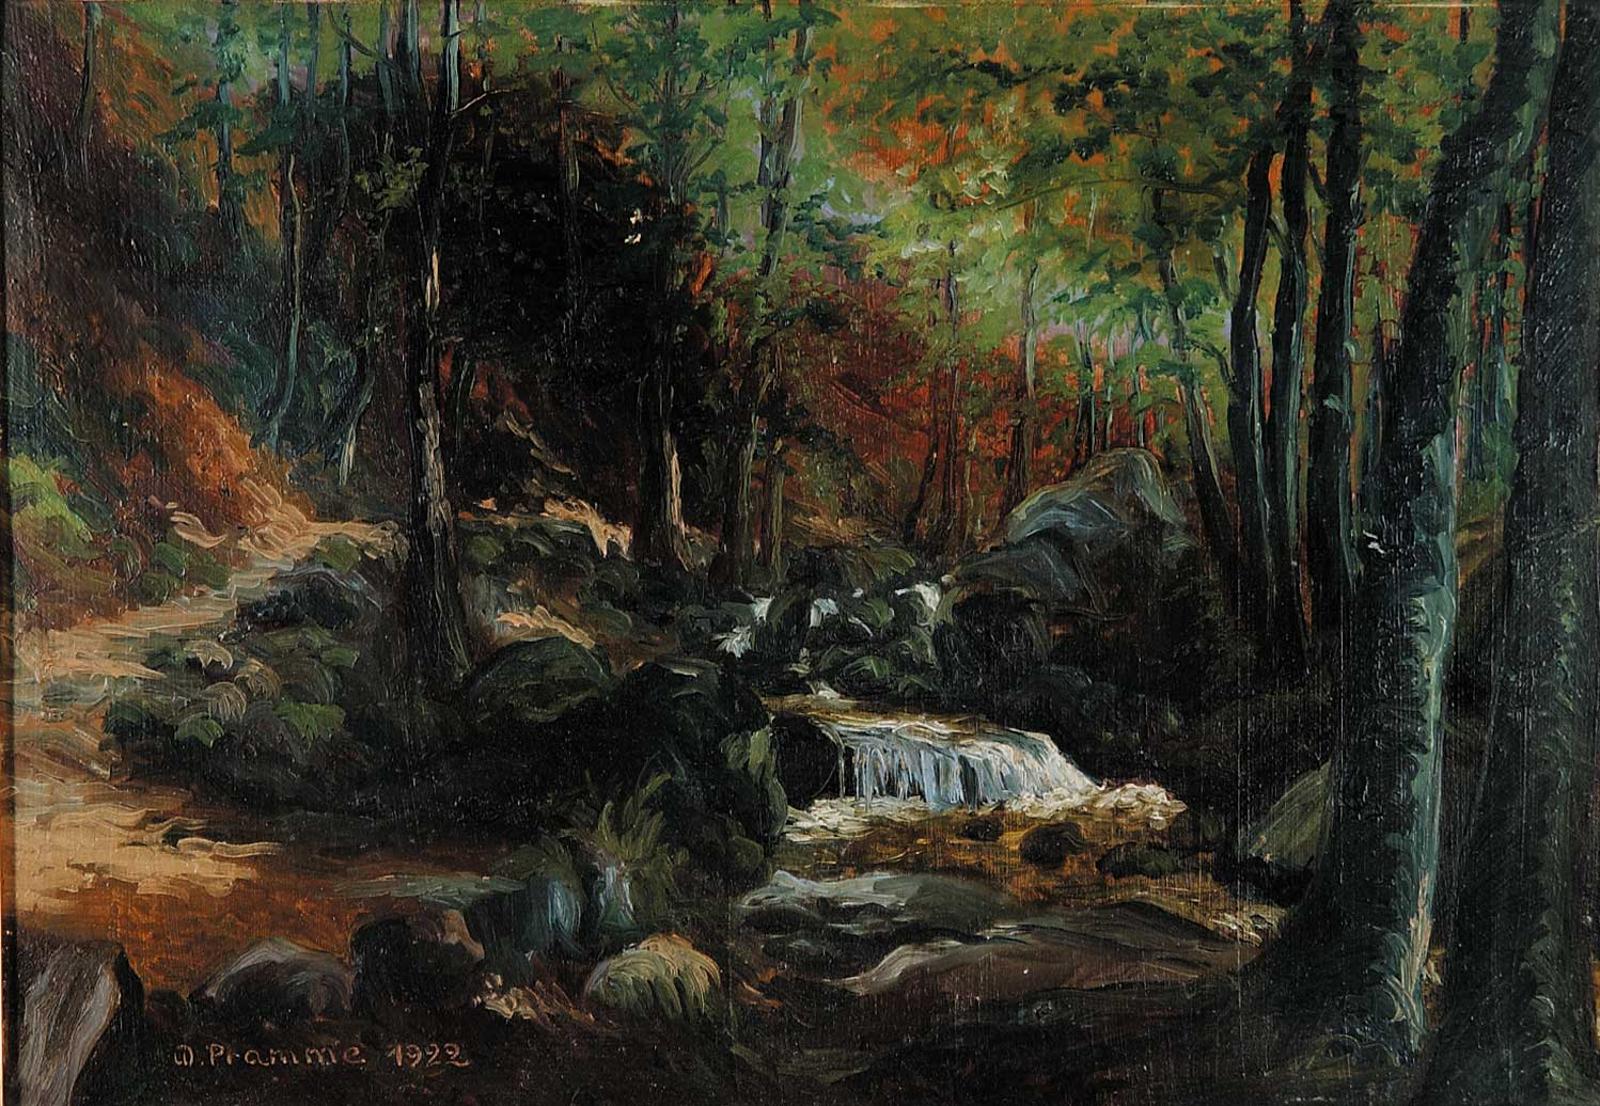 Wilhelm Pramme - Untitled - Waterfall in the Forest